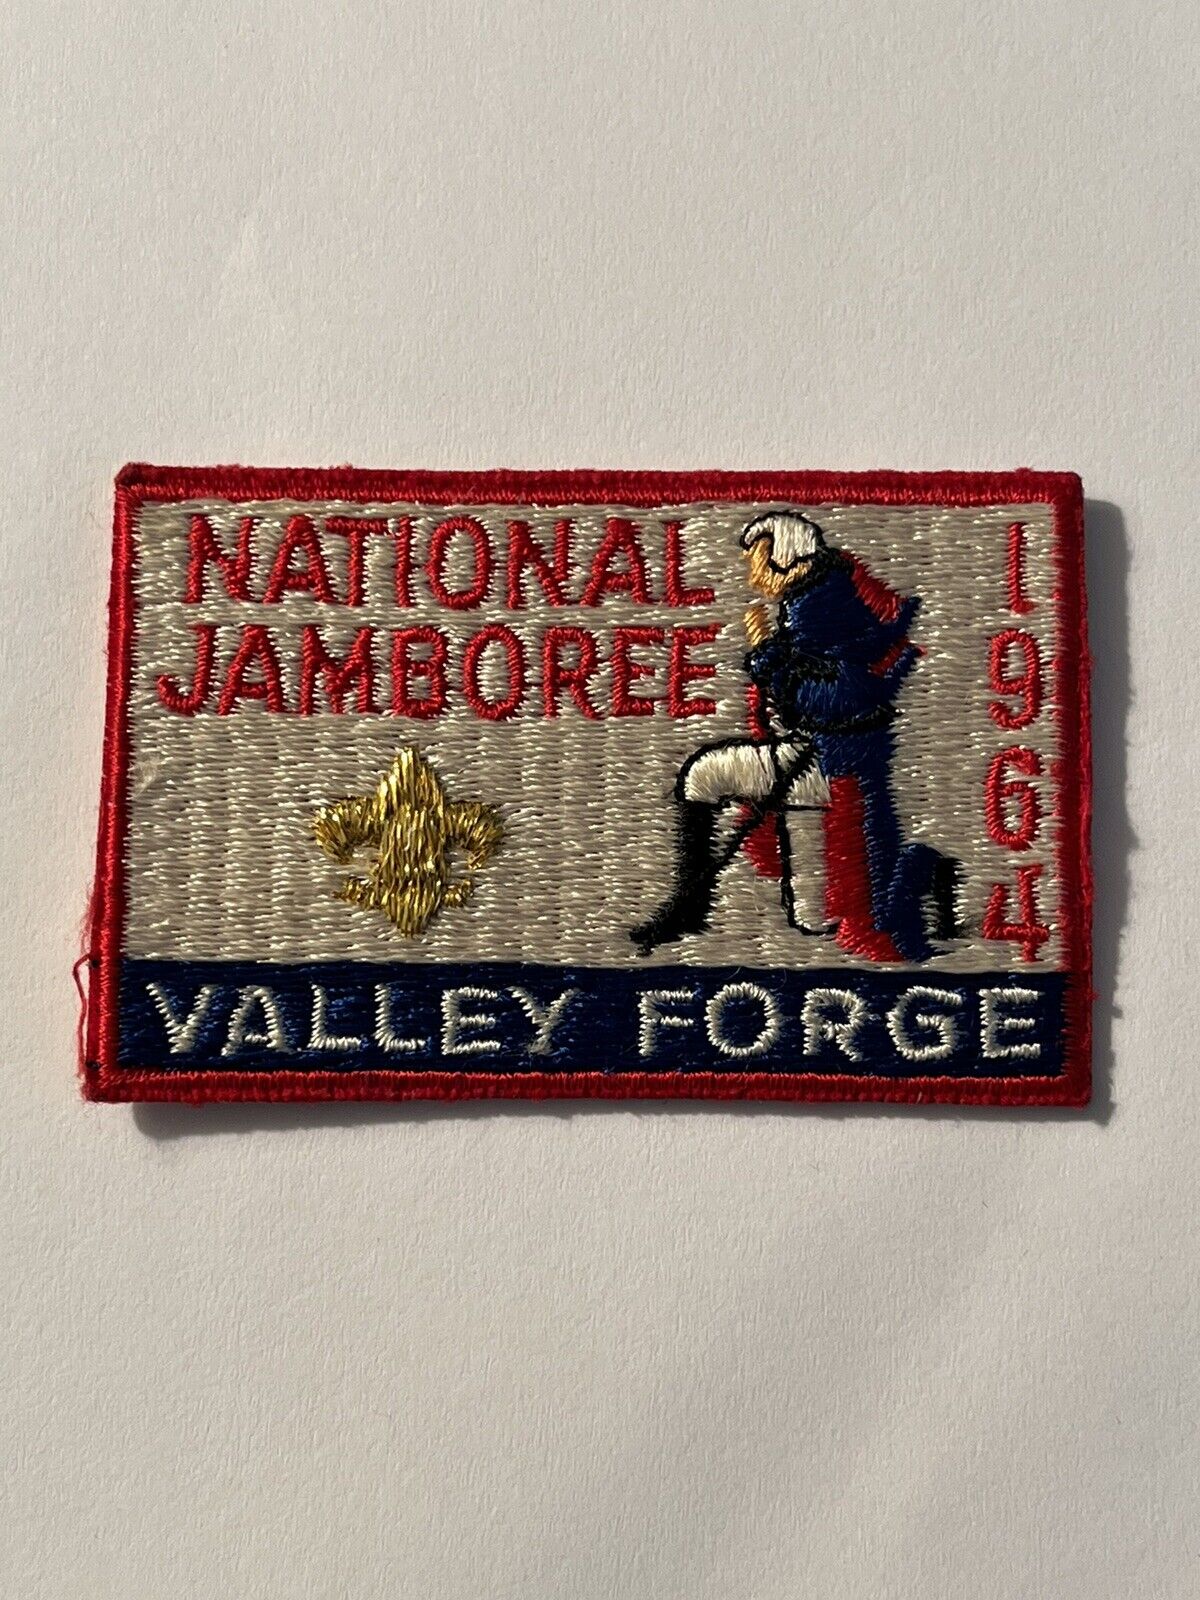 1964 National Jamboree Valley Forge-Pocket Patch